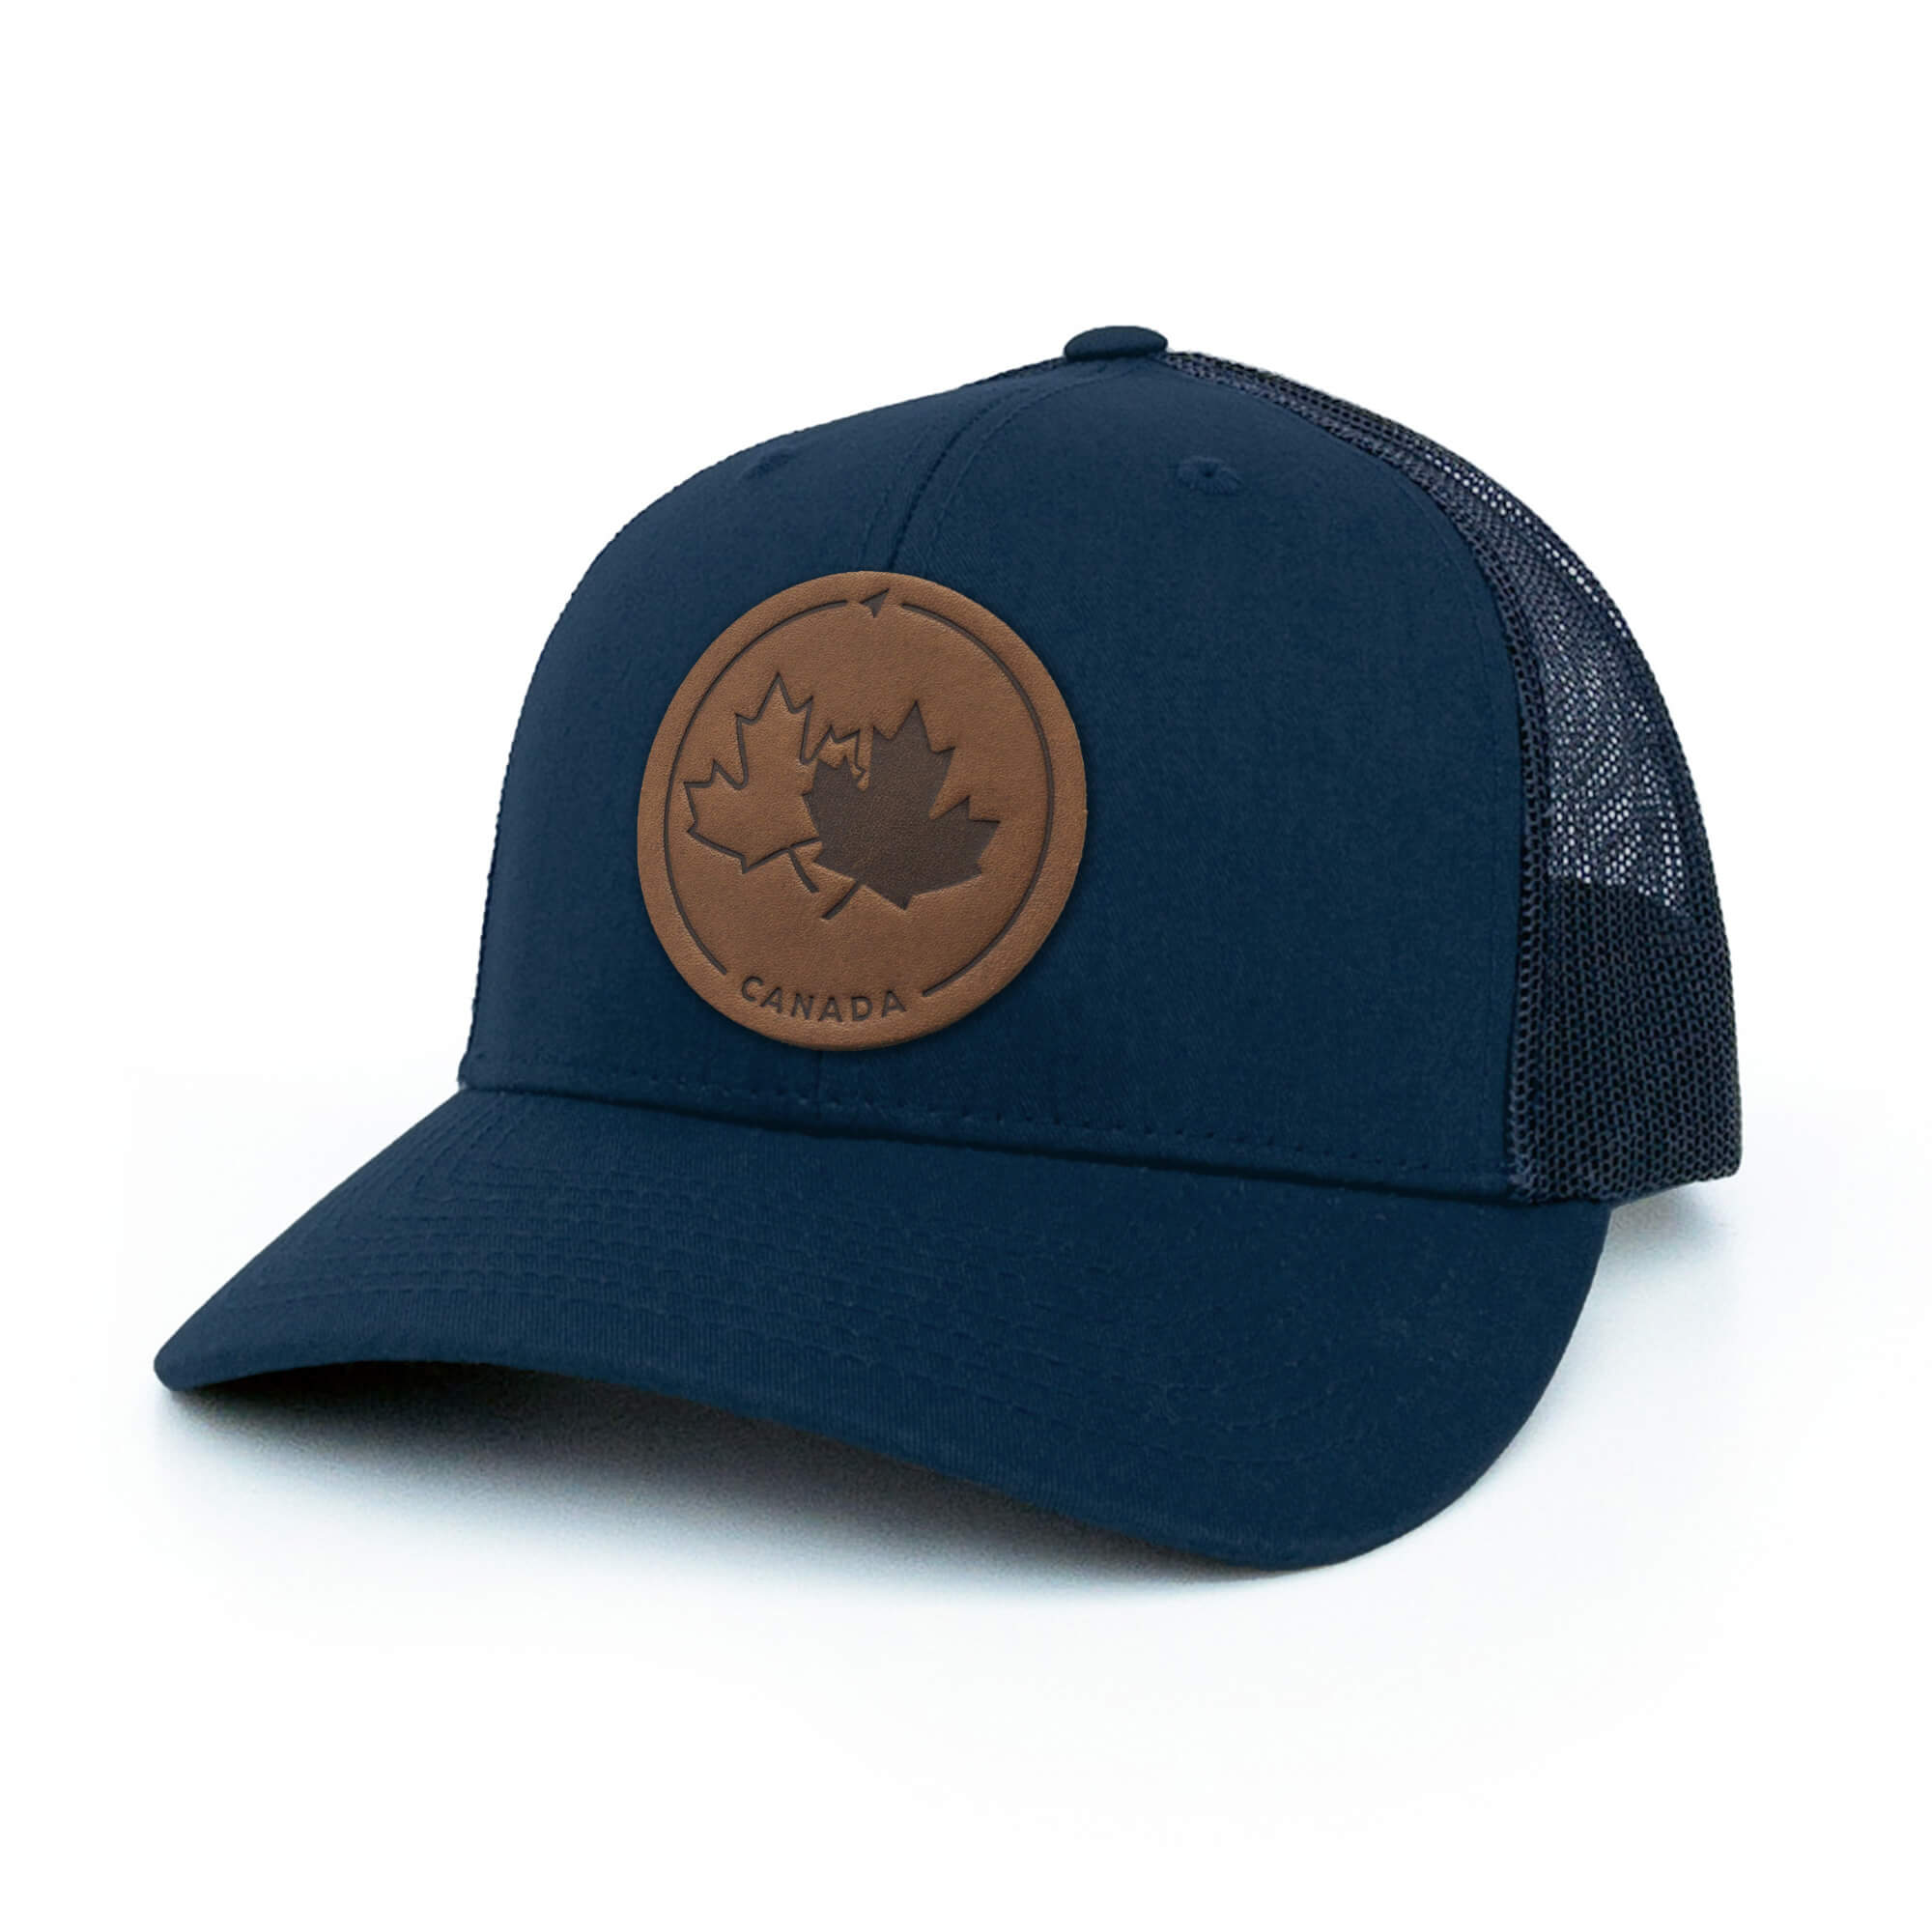 Navy trucker hat with full-grain leather patch of Canada Strong and Free | BLACK-002-010, CHARC-002-010, NAVY-002-010, HGREY-002-010, MOSS-002-010, BROWN-002-010, RED-002-010